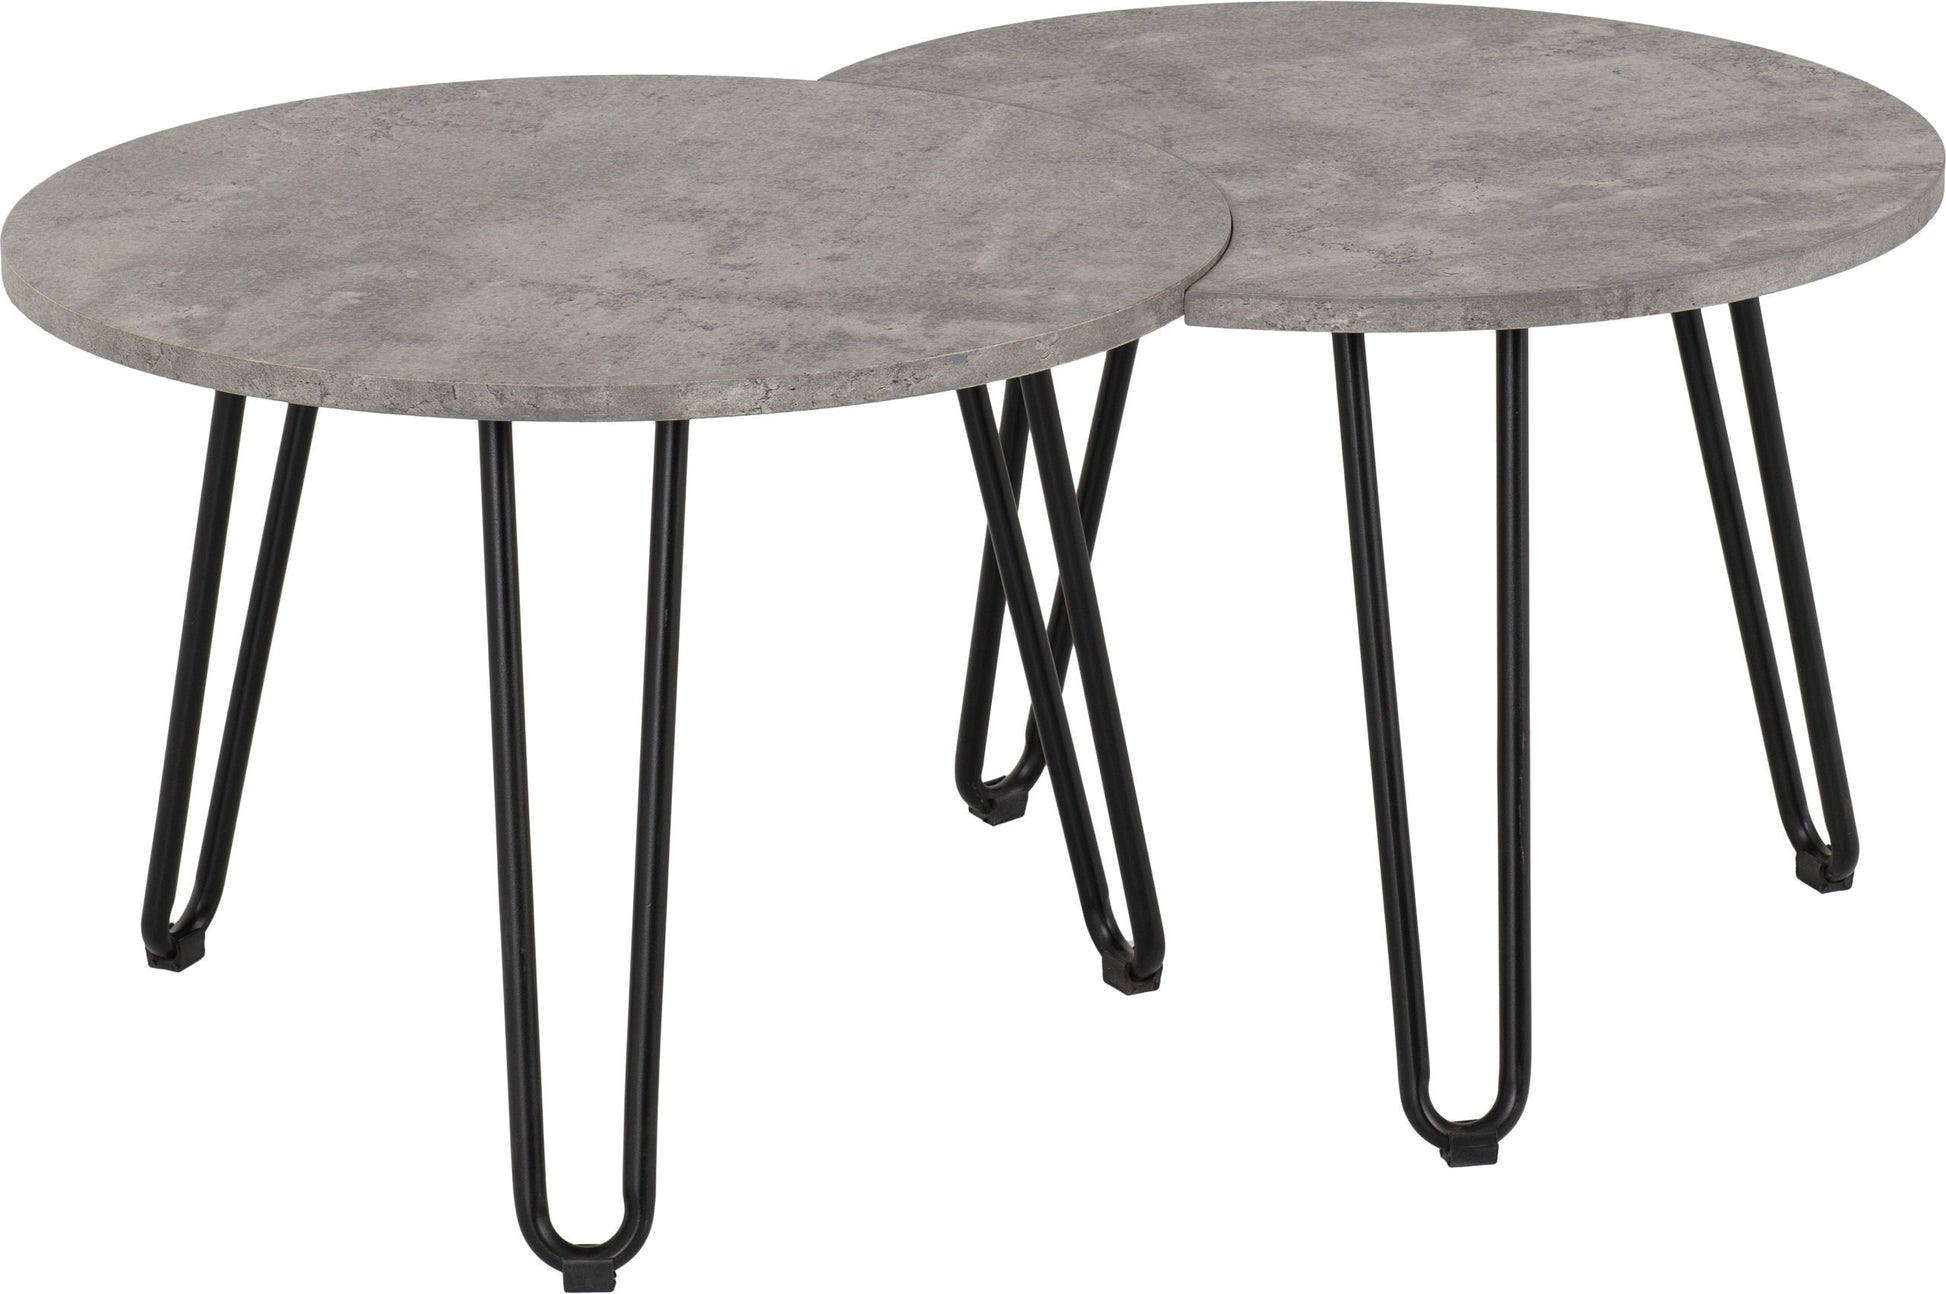 Athens Duo Coffee Table Set Concrete Effect/Black- The Right Buy Store